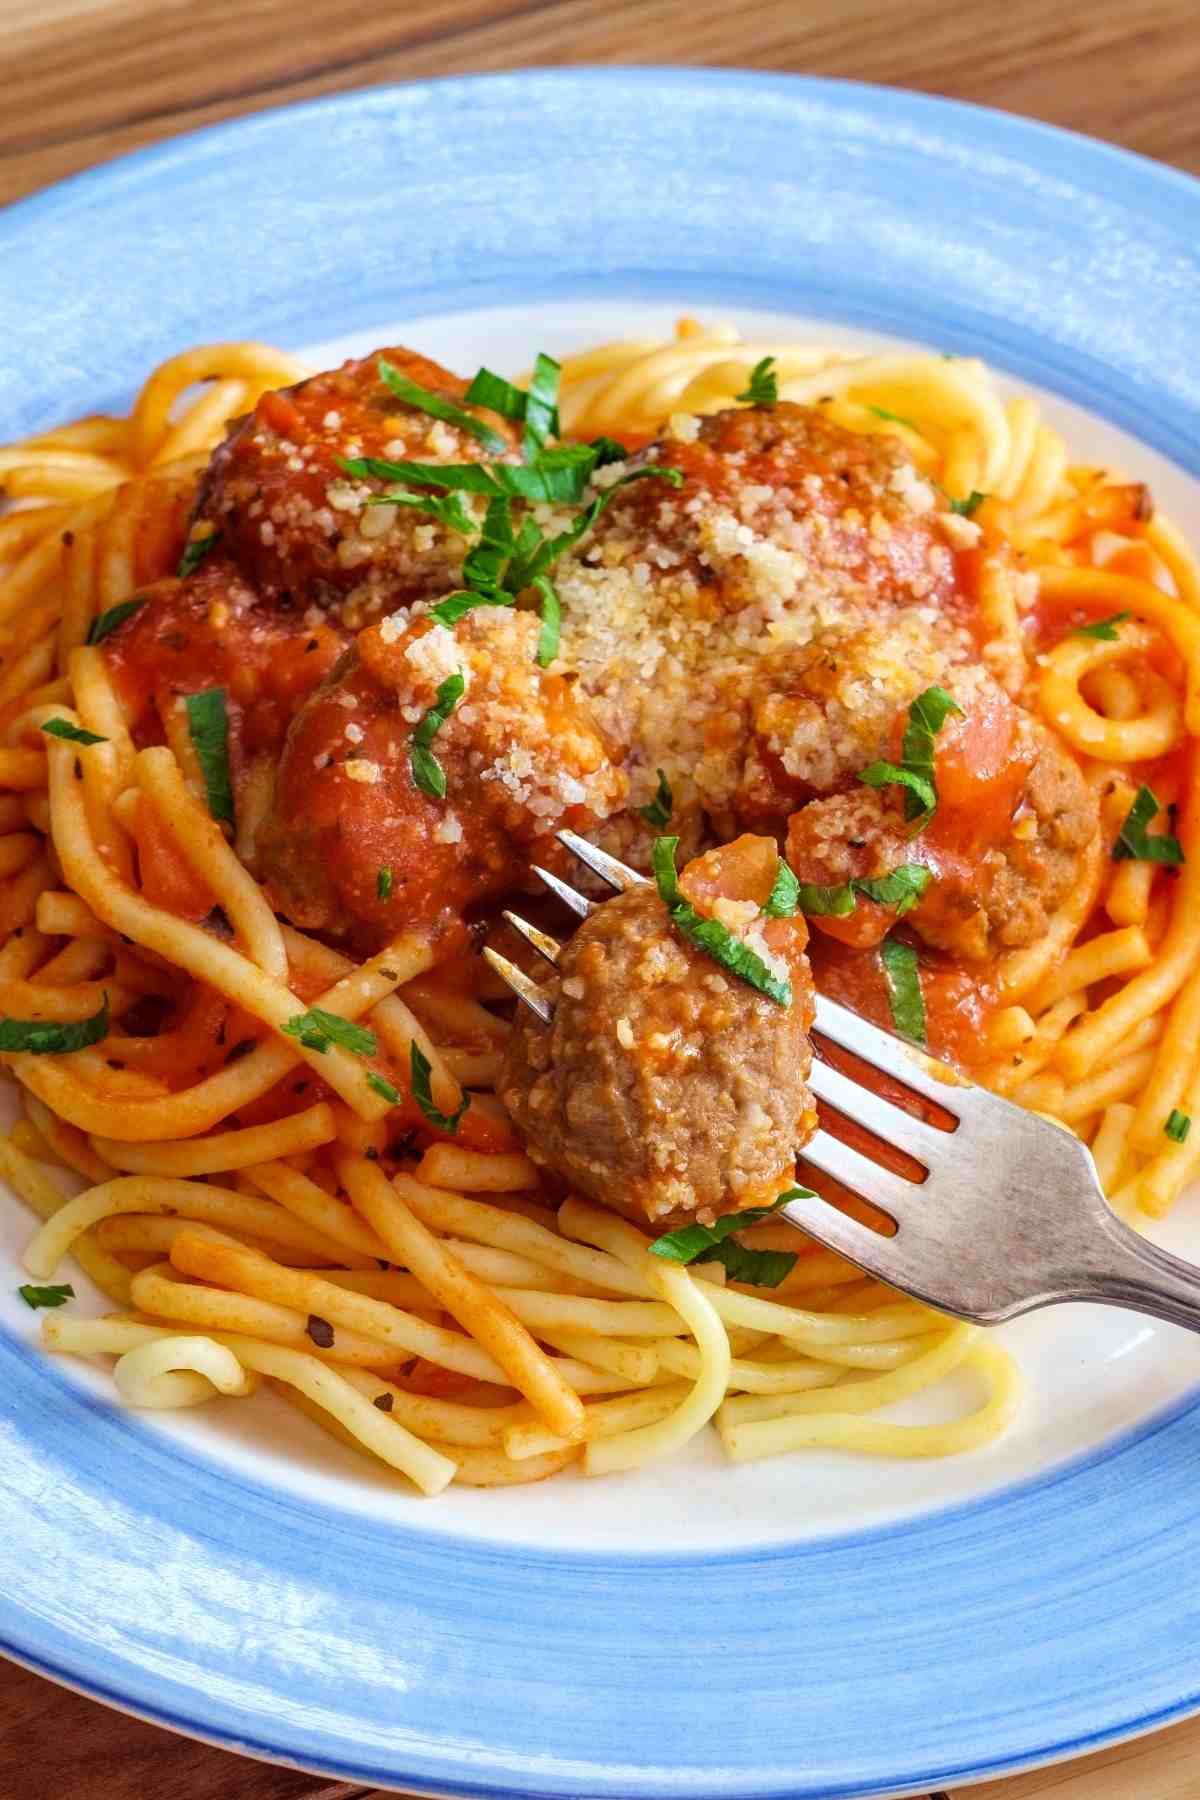 This homemade Beef Meatballs Recipe is ideal when served over pasta or in sandwiches! The meatballs are tender and juicy, and the tomato sauce is tangy and flavorful.